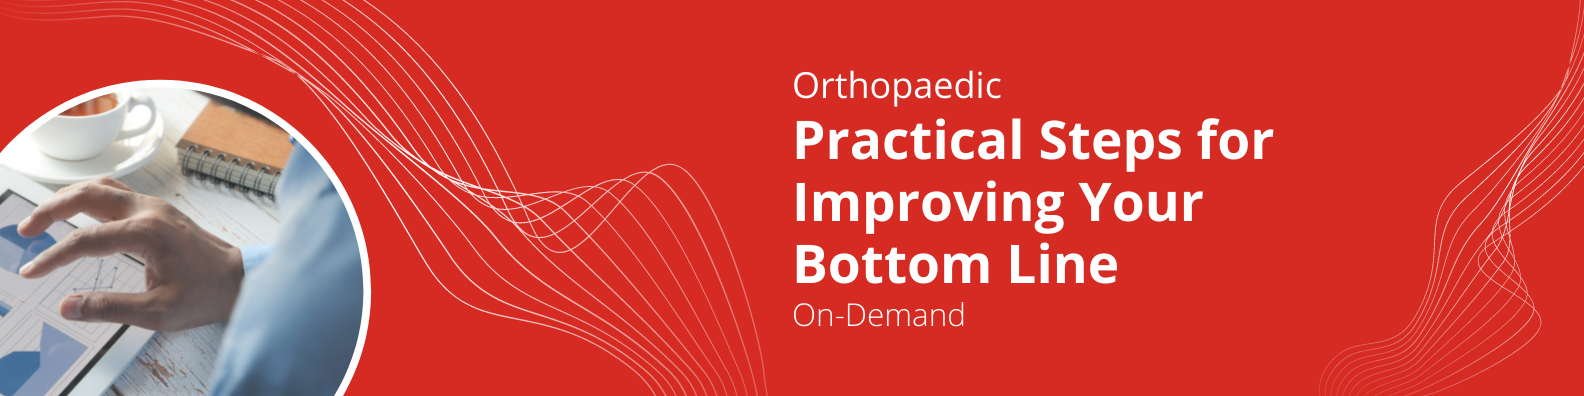 On-Demand - Ortho Practical Steps for Improving Your Bottom Line